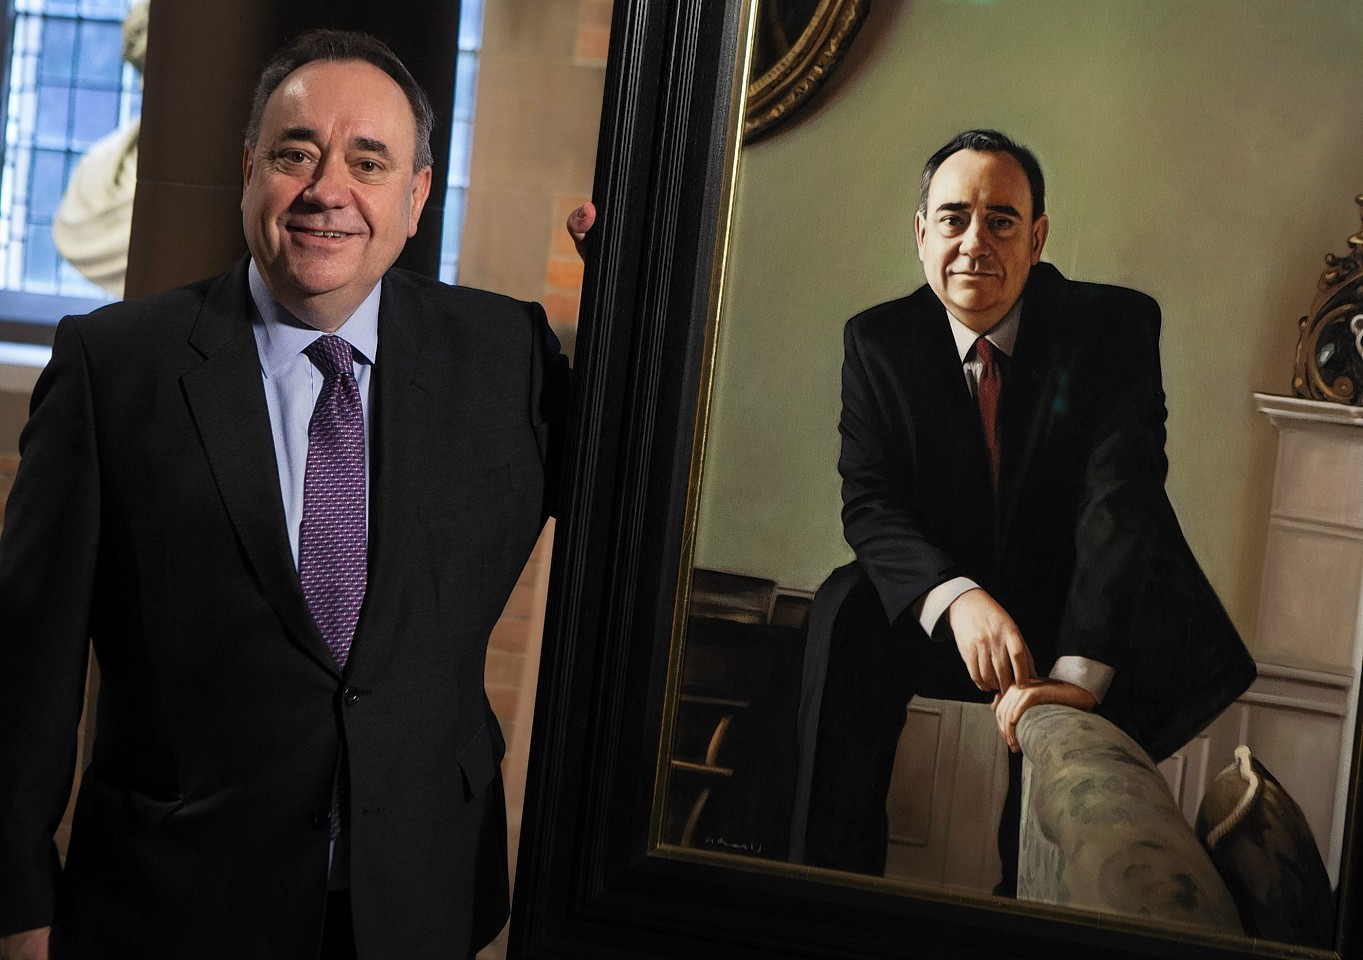 Former First Minister Alex Salmond MP unveils a portrait of himself by Gerard Burns, at the National Galleries of Scotland